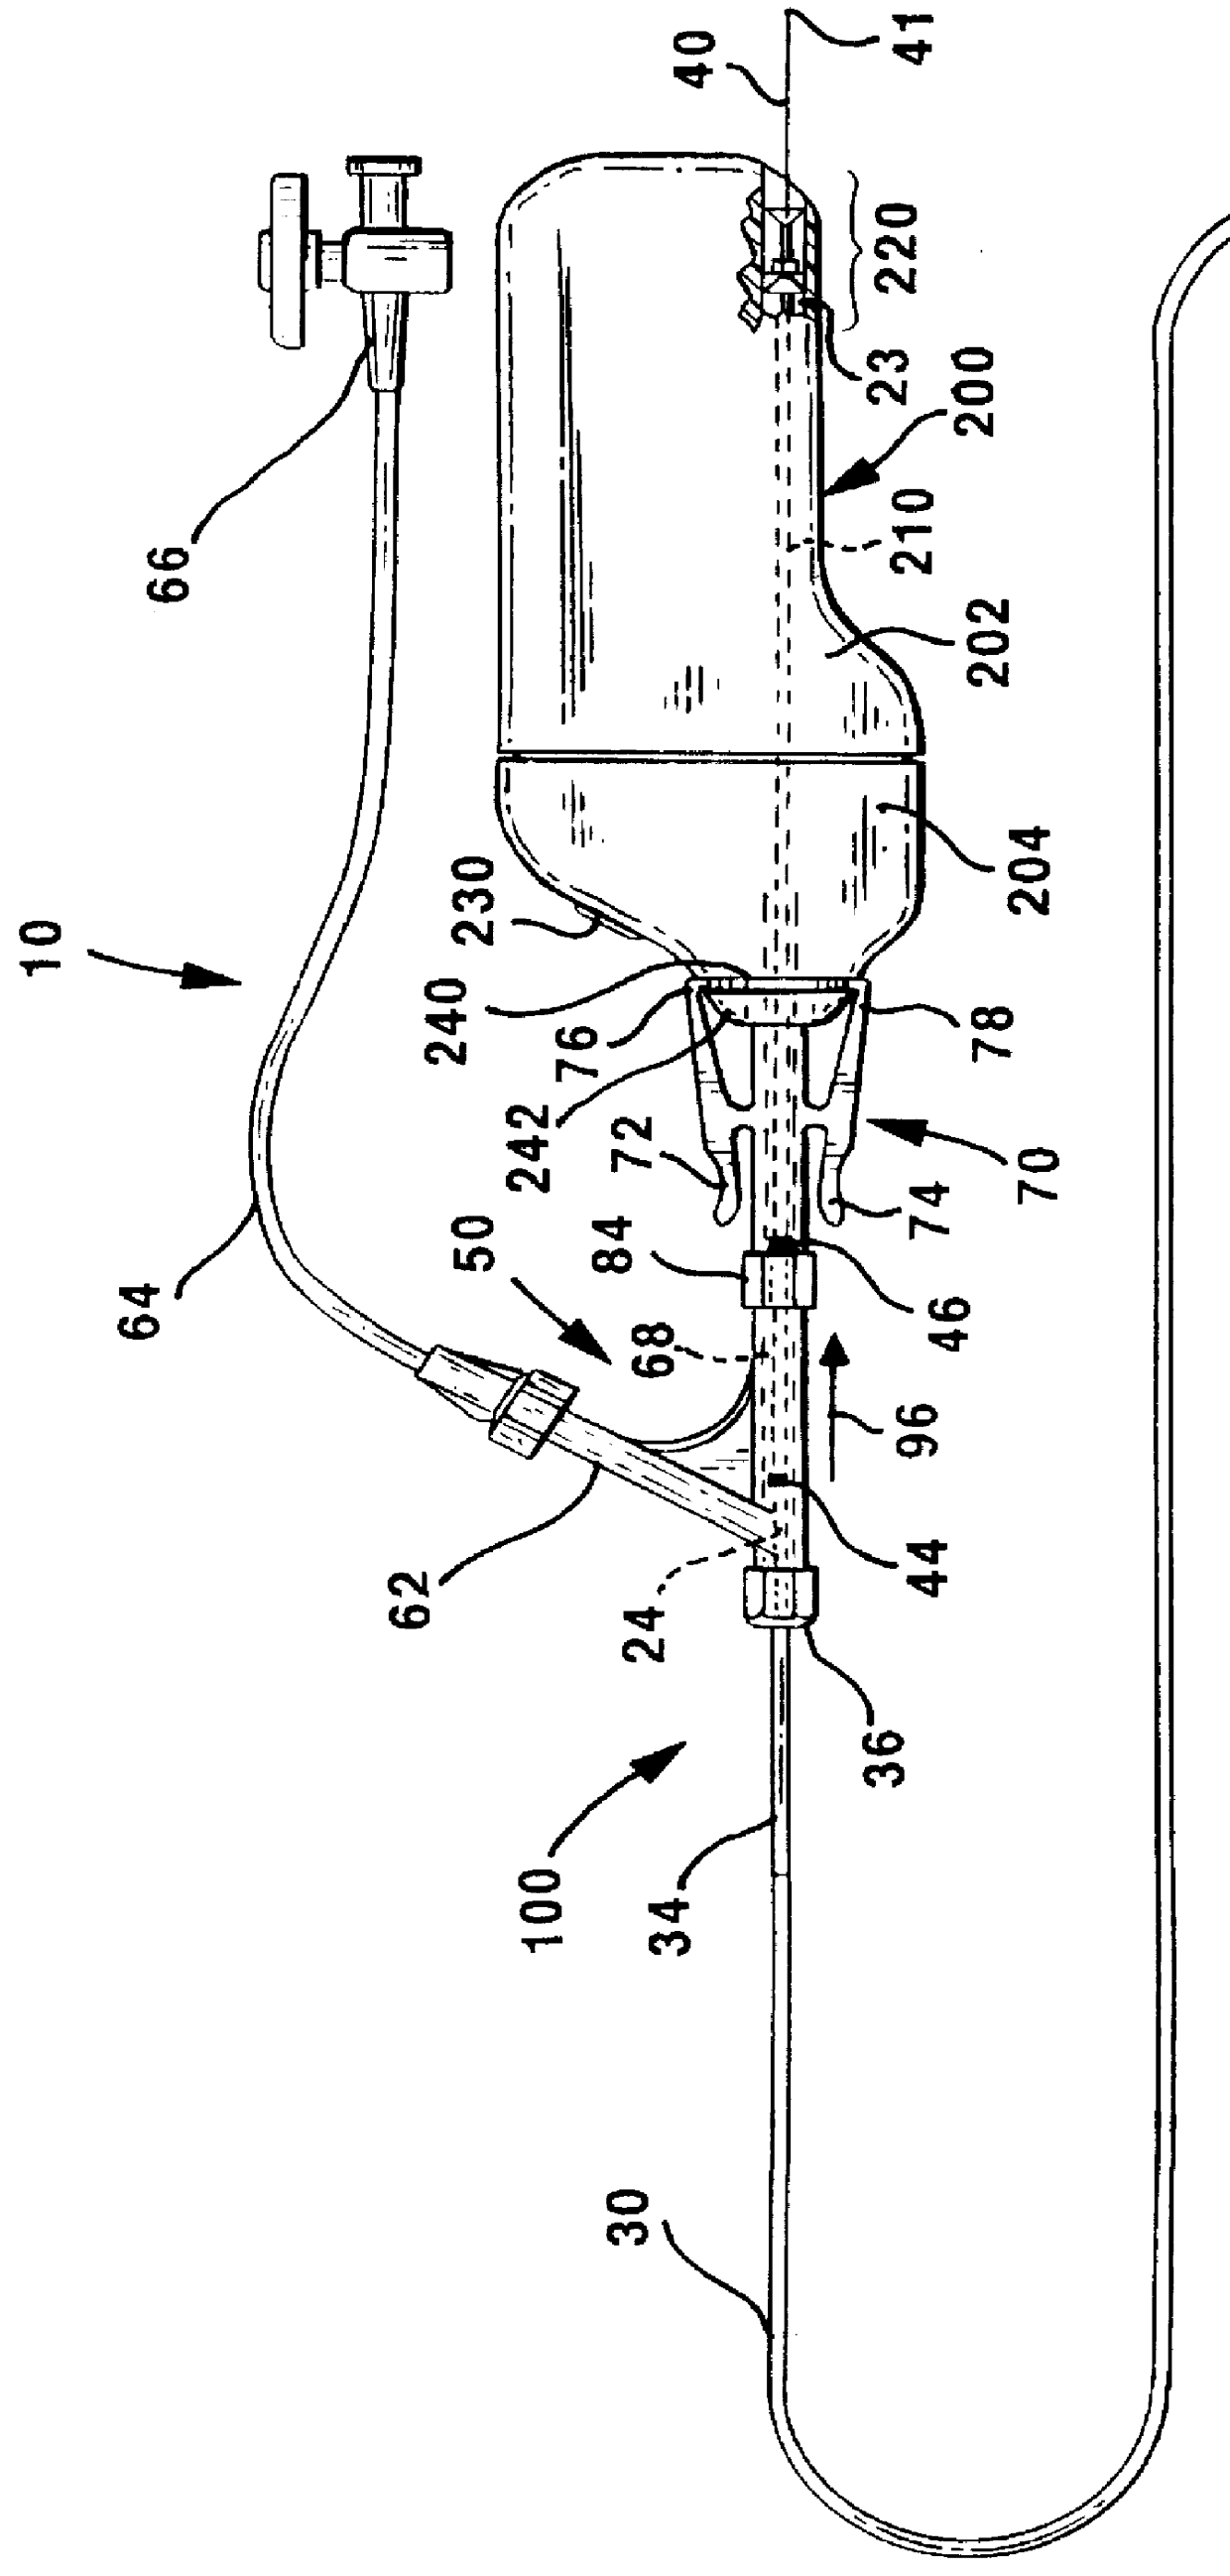 Rotatable dynamic seal and guide for a medical obstruction treatment device sub-assembly coupled to a drive motor unit